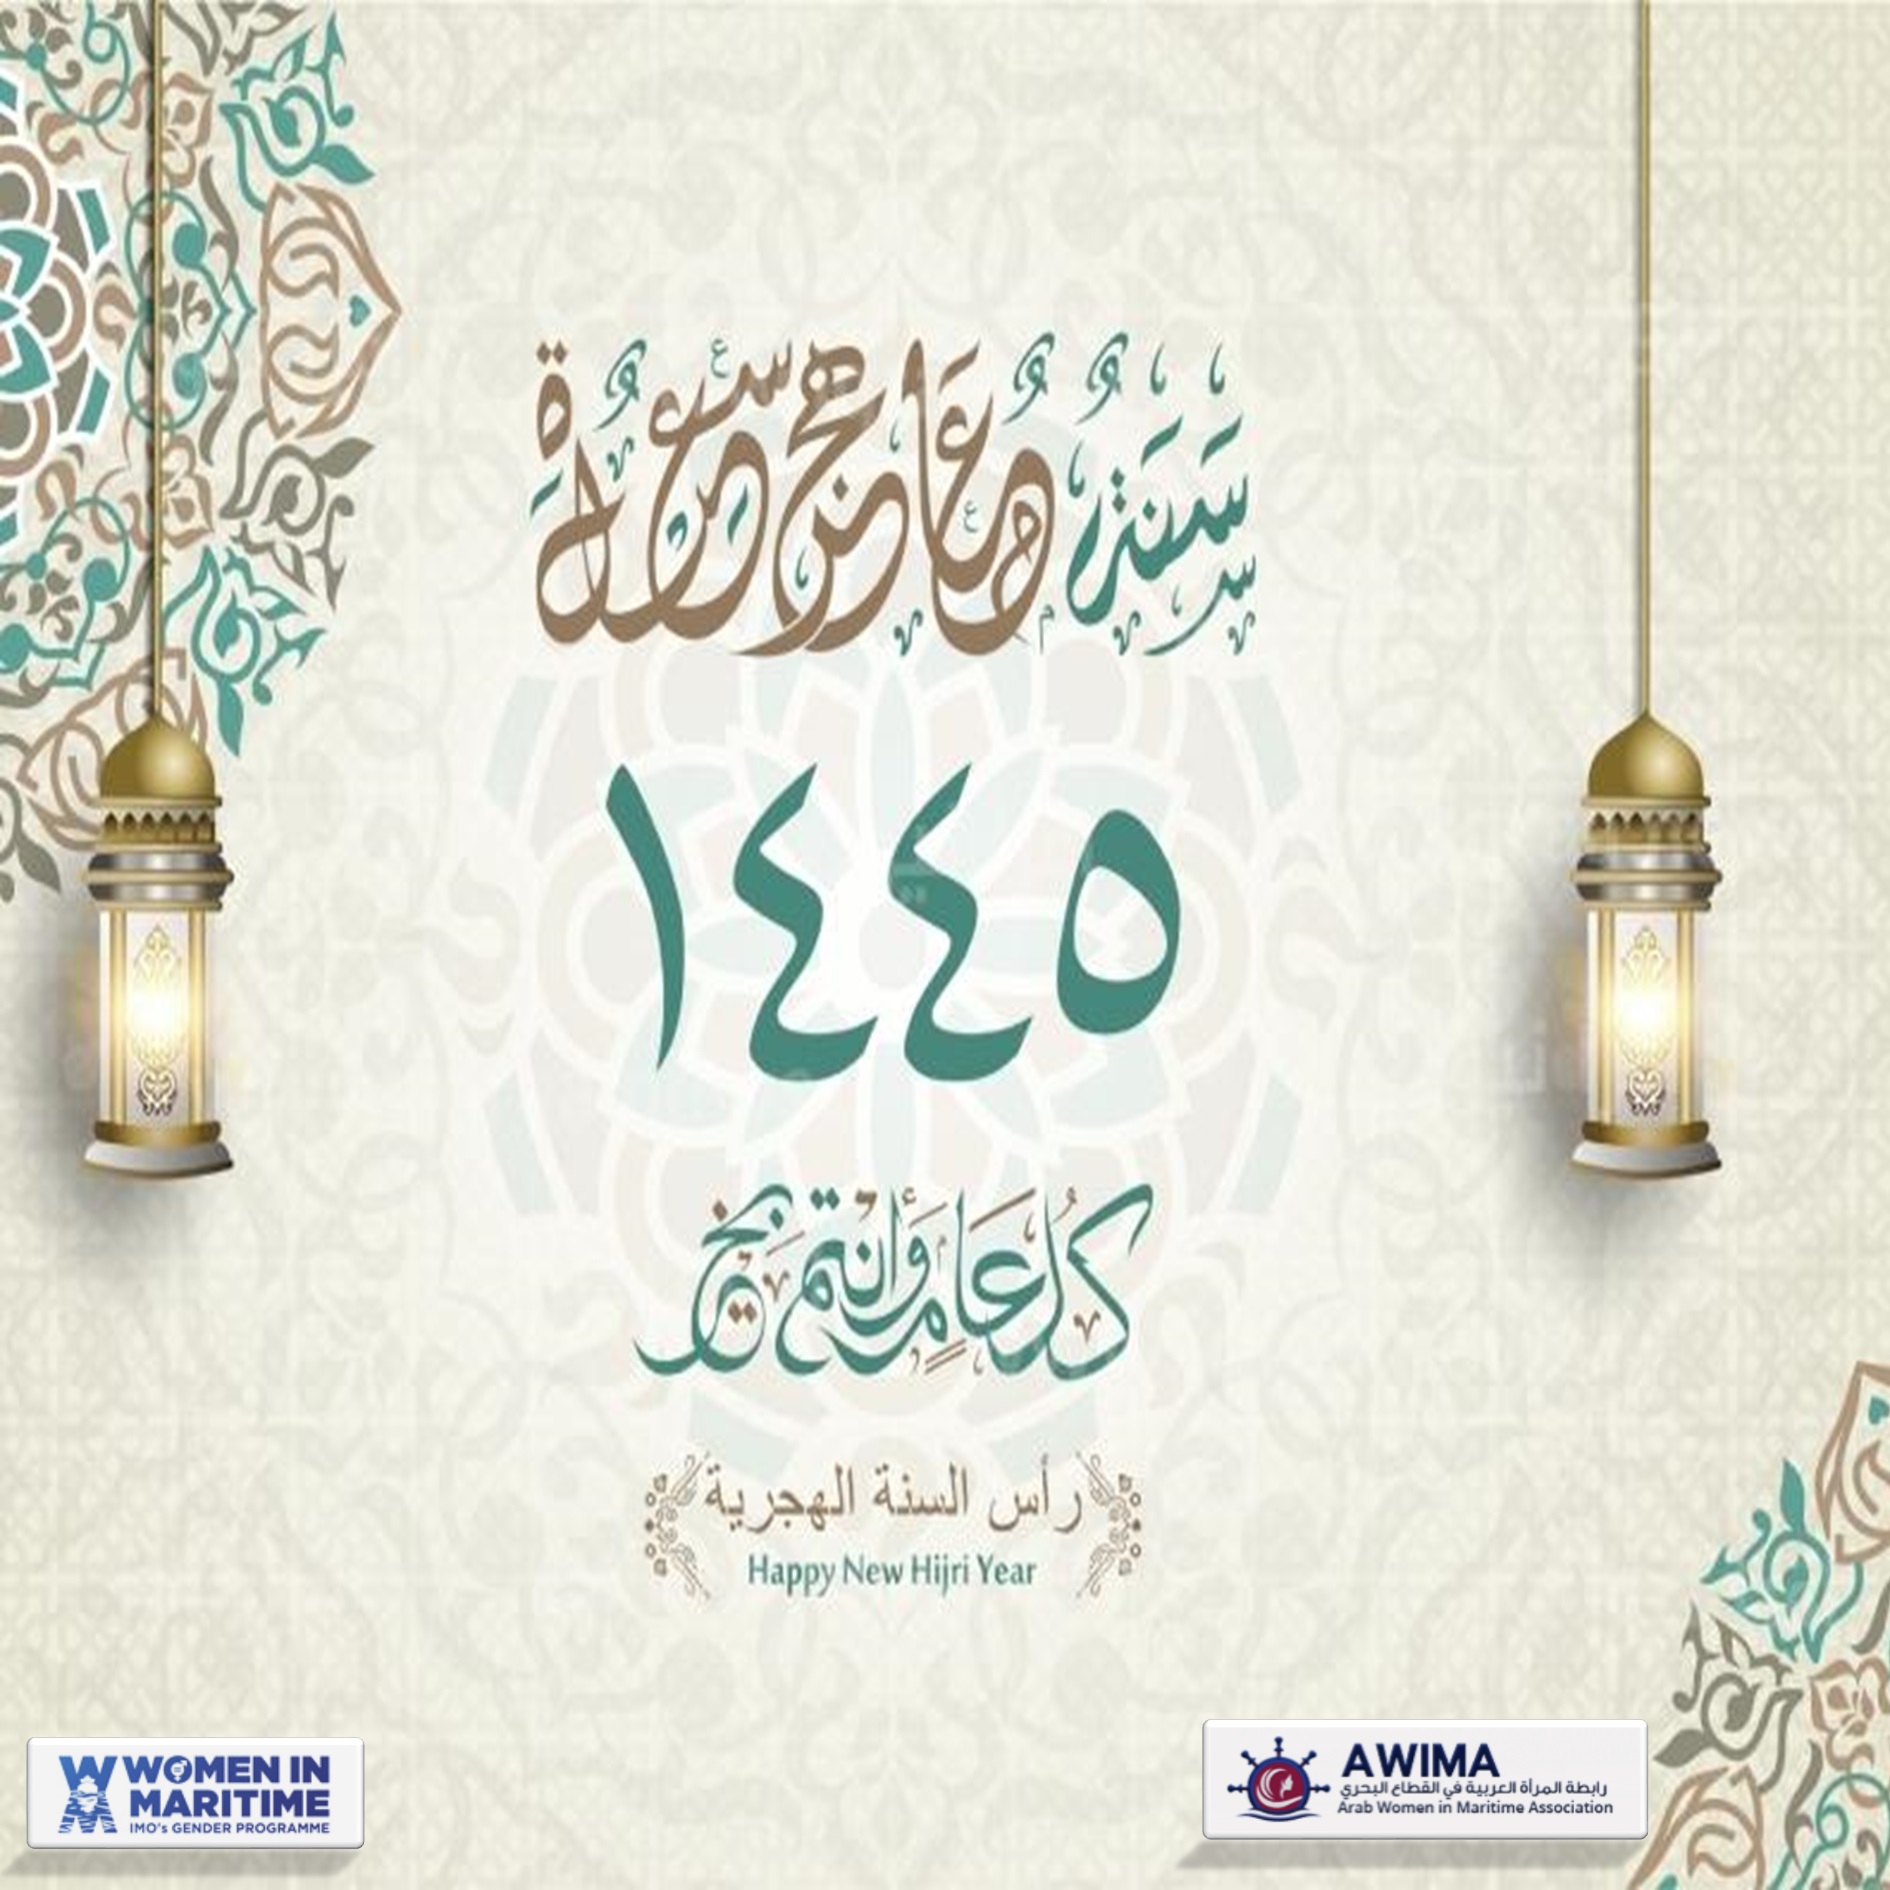 The Secretariat of the Arab Women Association in the maritime sector, wishes you a happy new Hijri year 1445